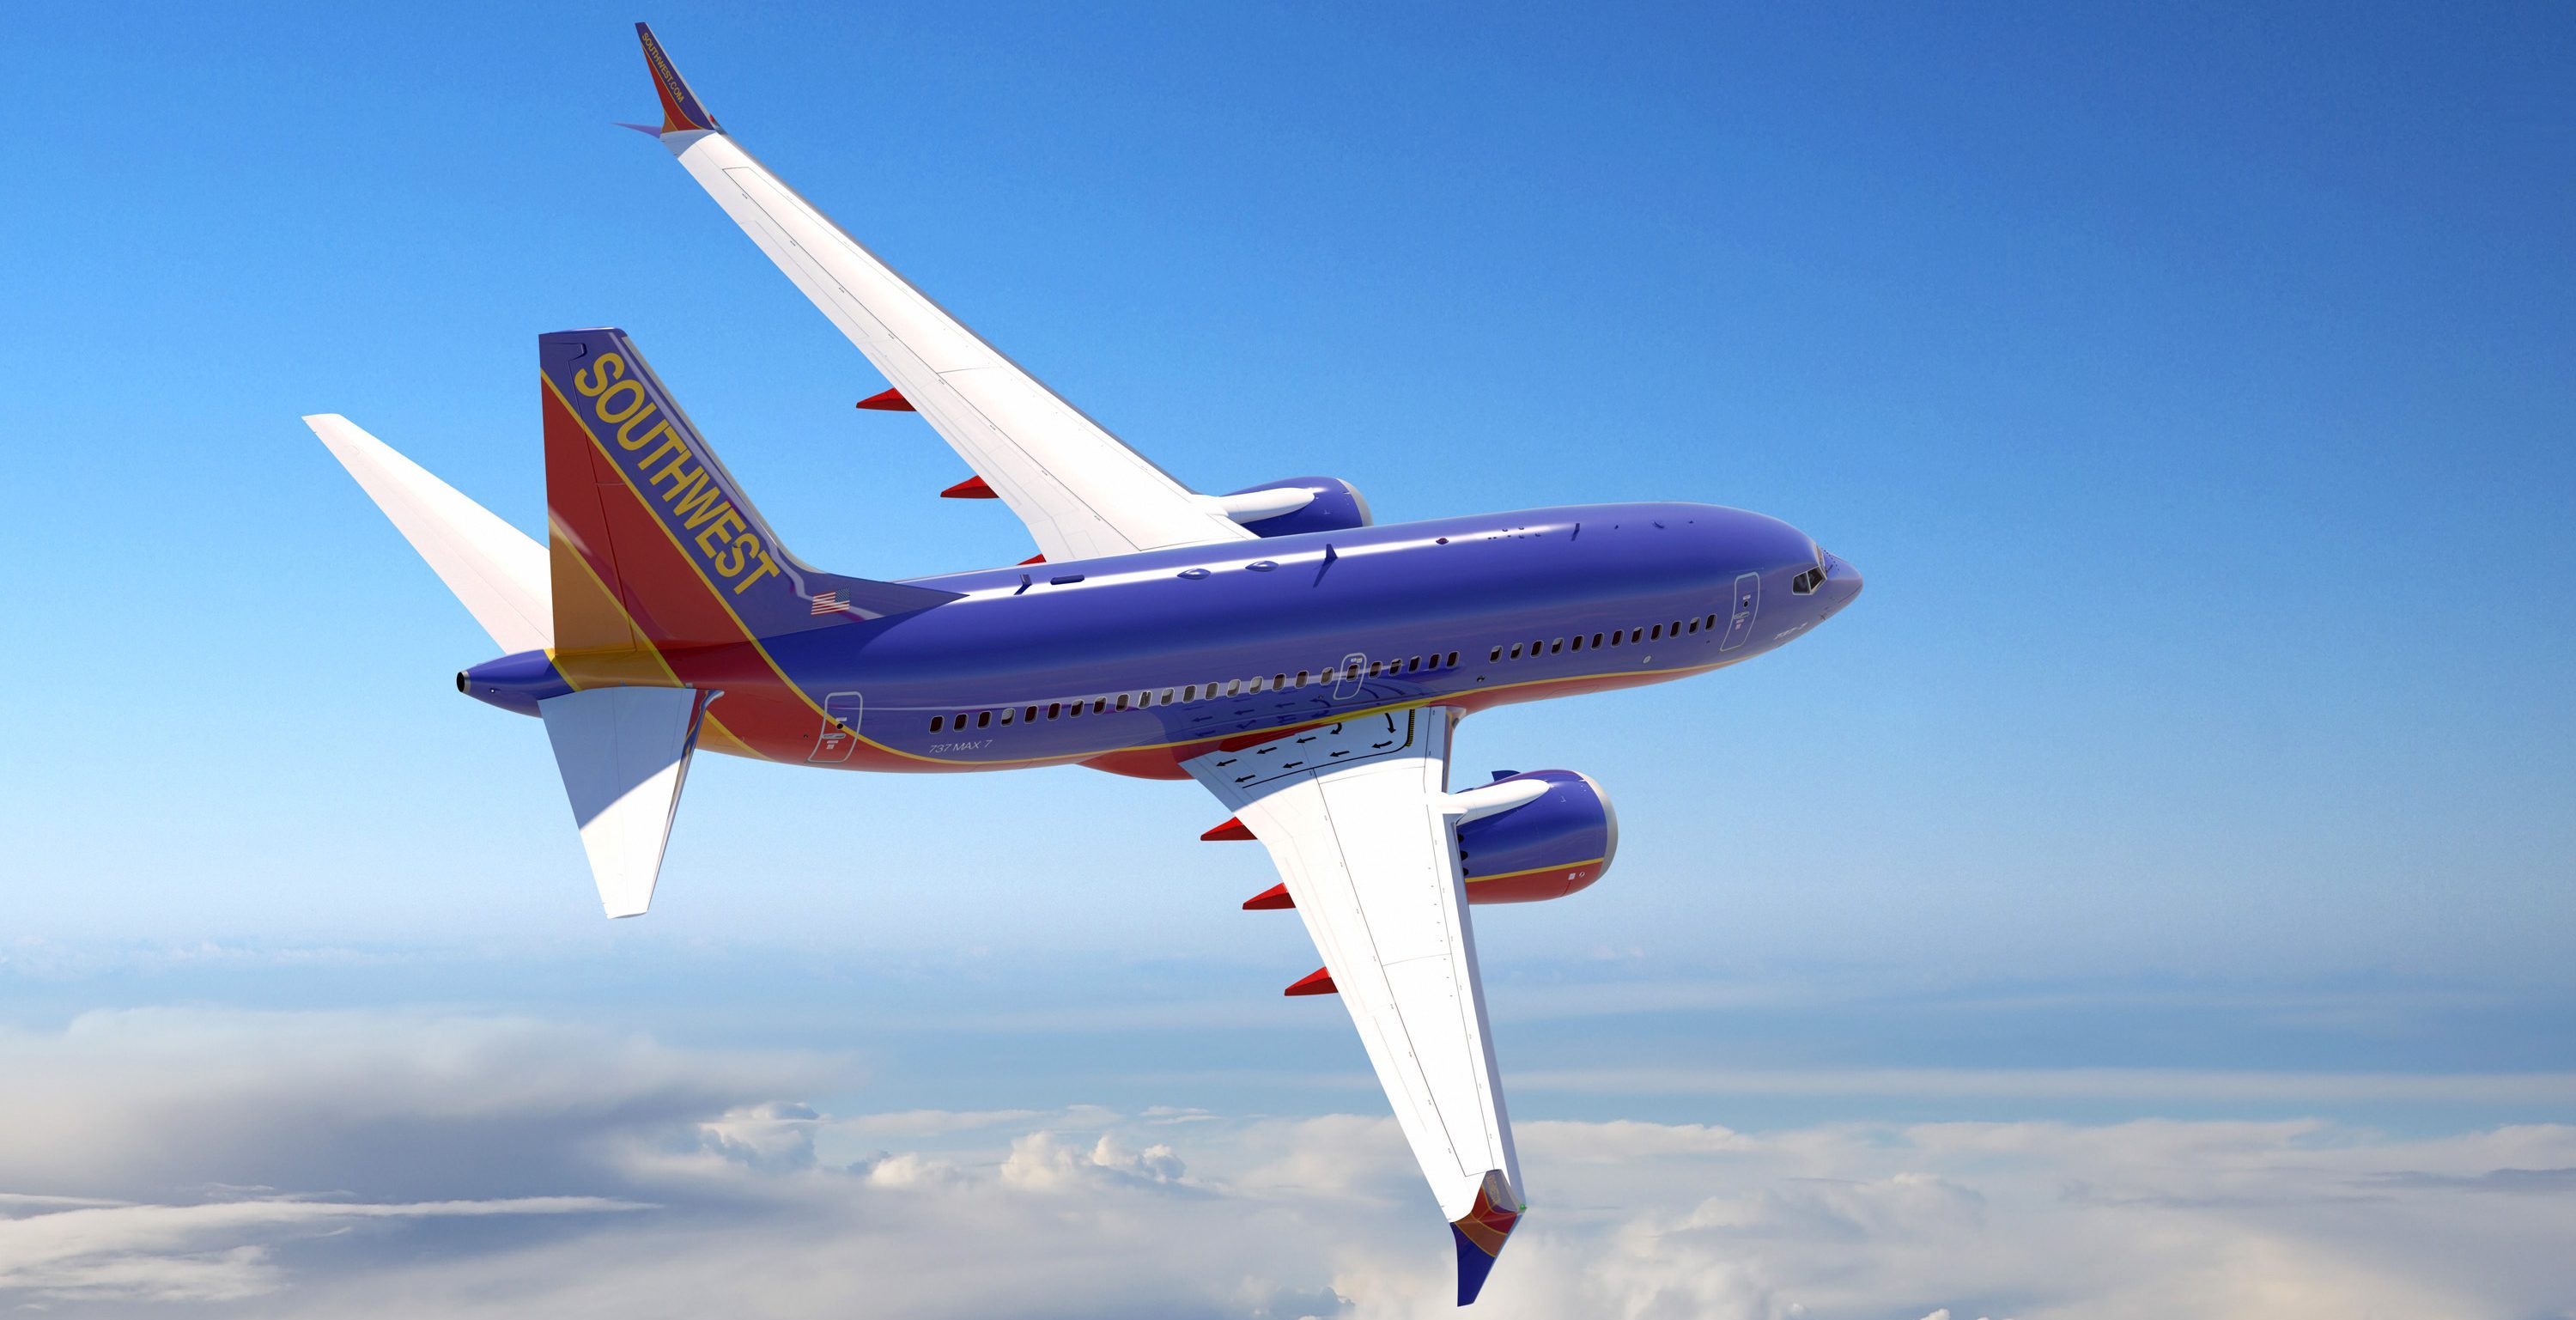 Southwest Airlines confirms accident